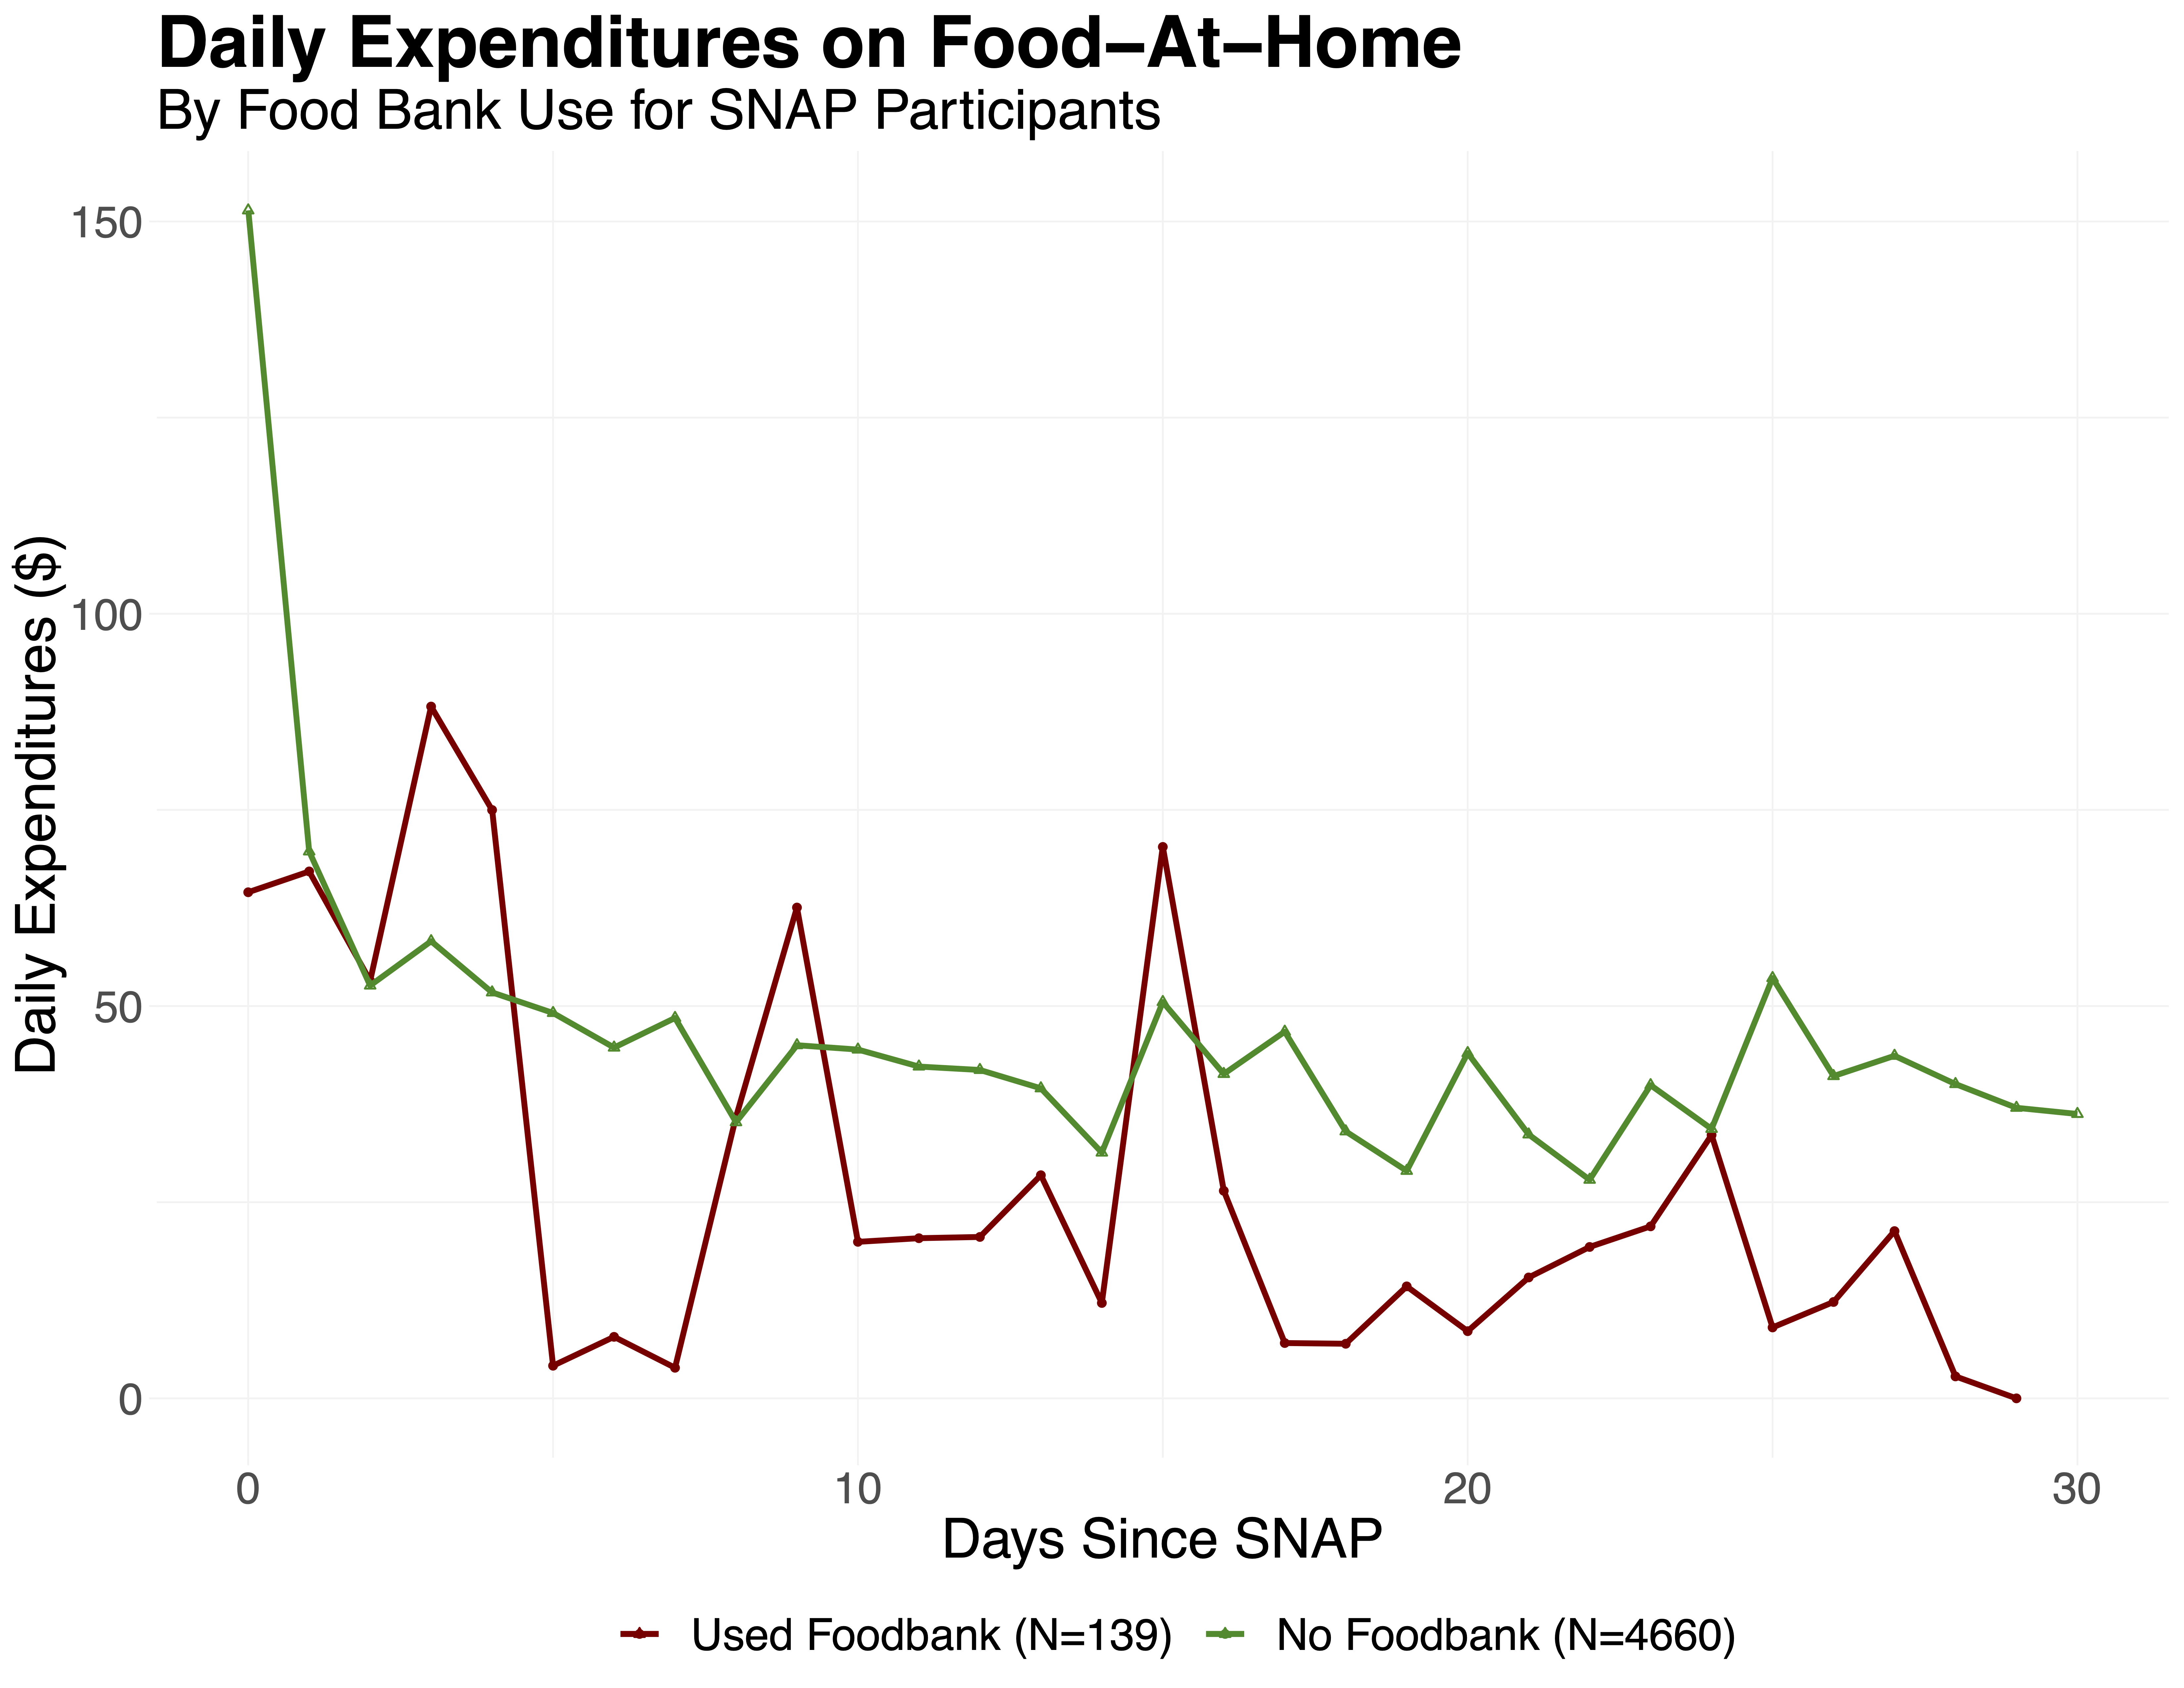 Expenditures on Food-at-Home by Days Since SNAP, Foodbank and Non-Foodbank Households